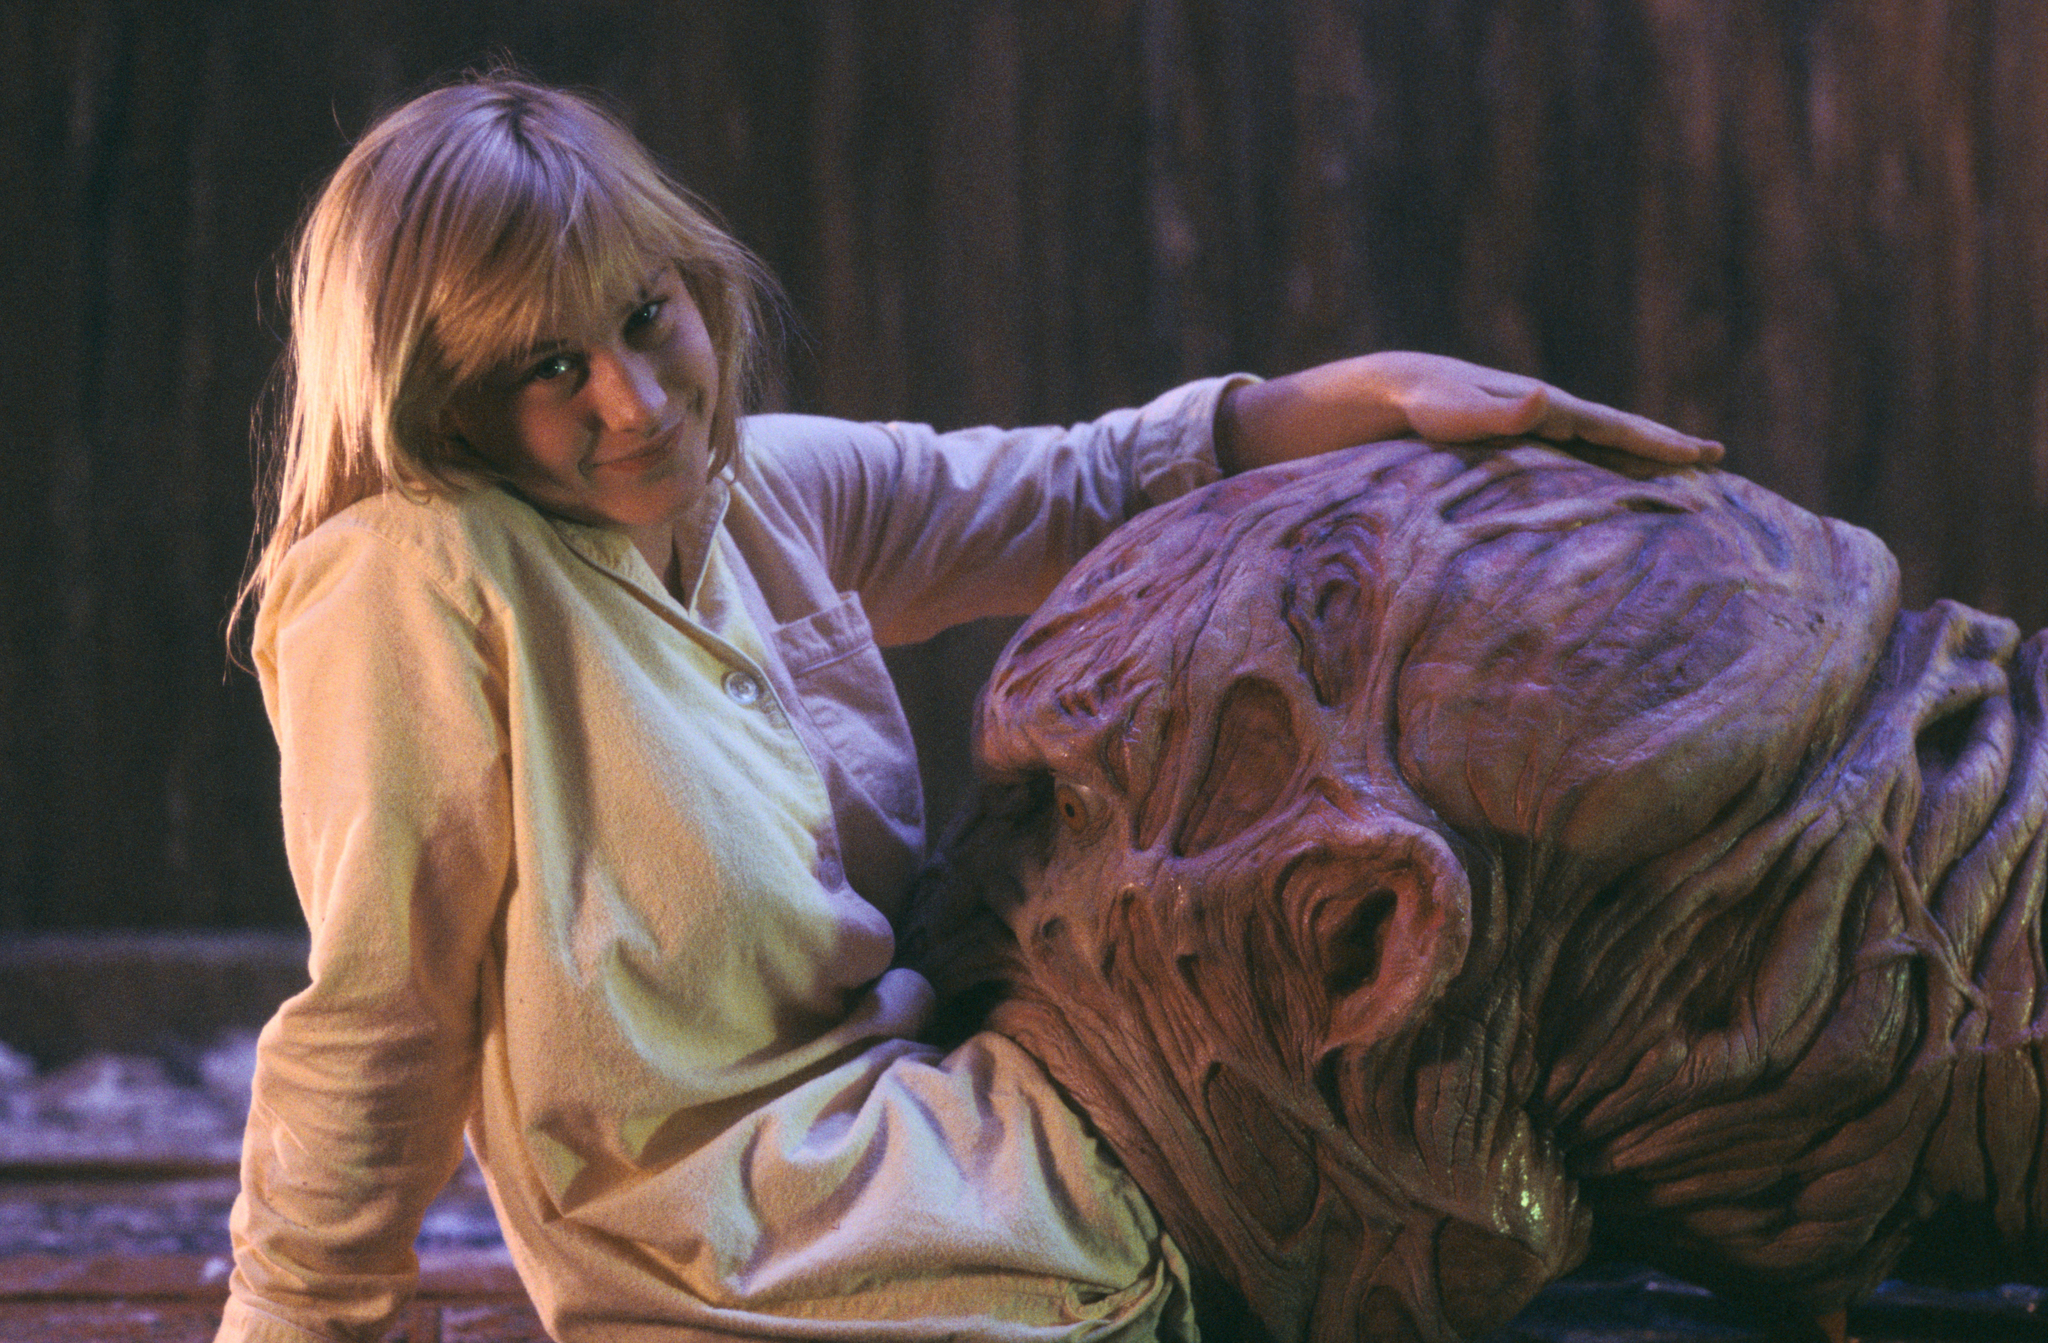 Patricia Arquette in A Nightmare on Elm Street 3: Dream Warriors (1987)